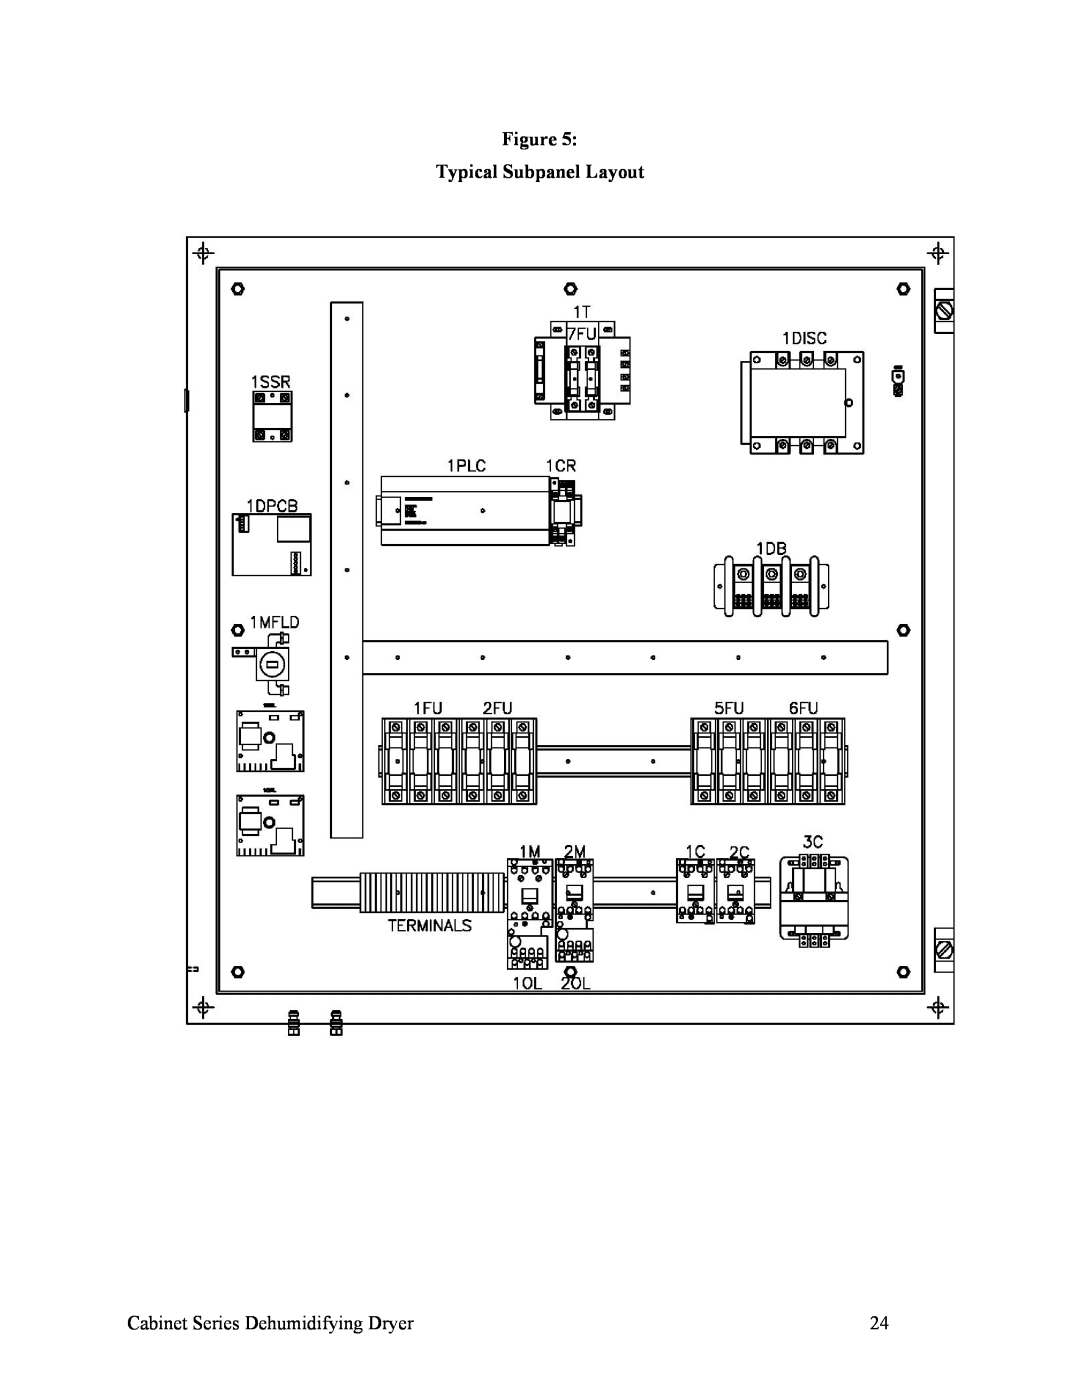 Sterling SDA 150-380, 90-225 CFM installation manual Figure Typical Subpanel Layout, Cabinet Series Dehumidifying Dryer 